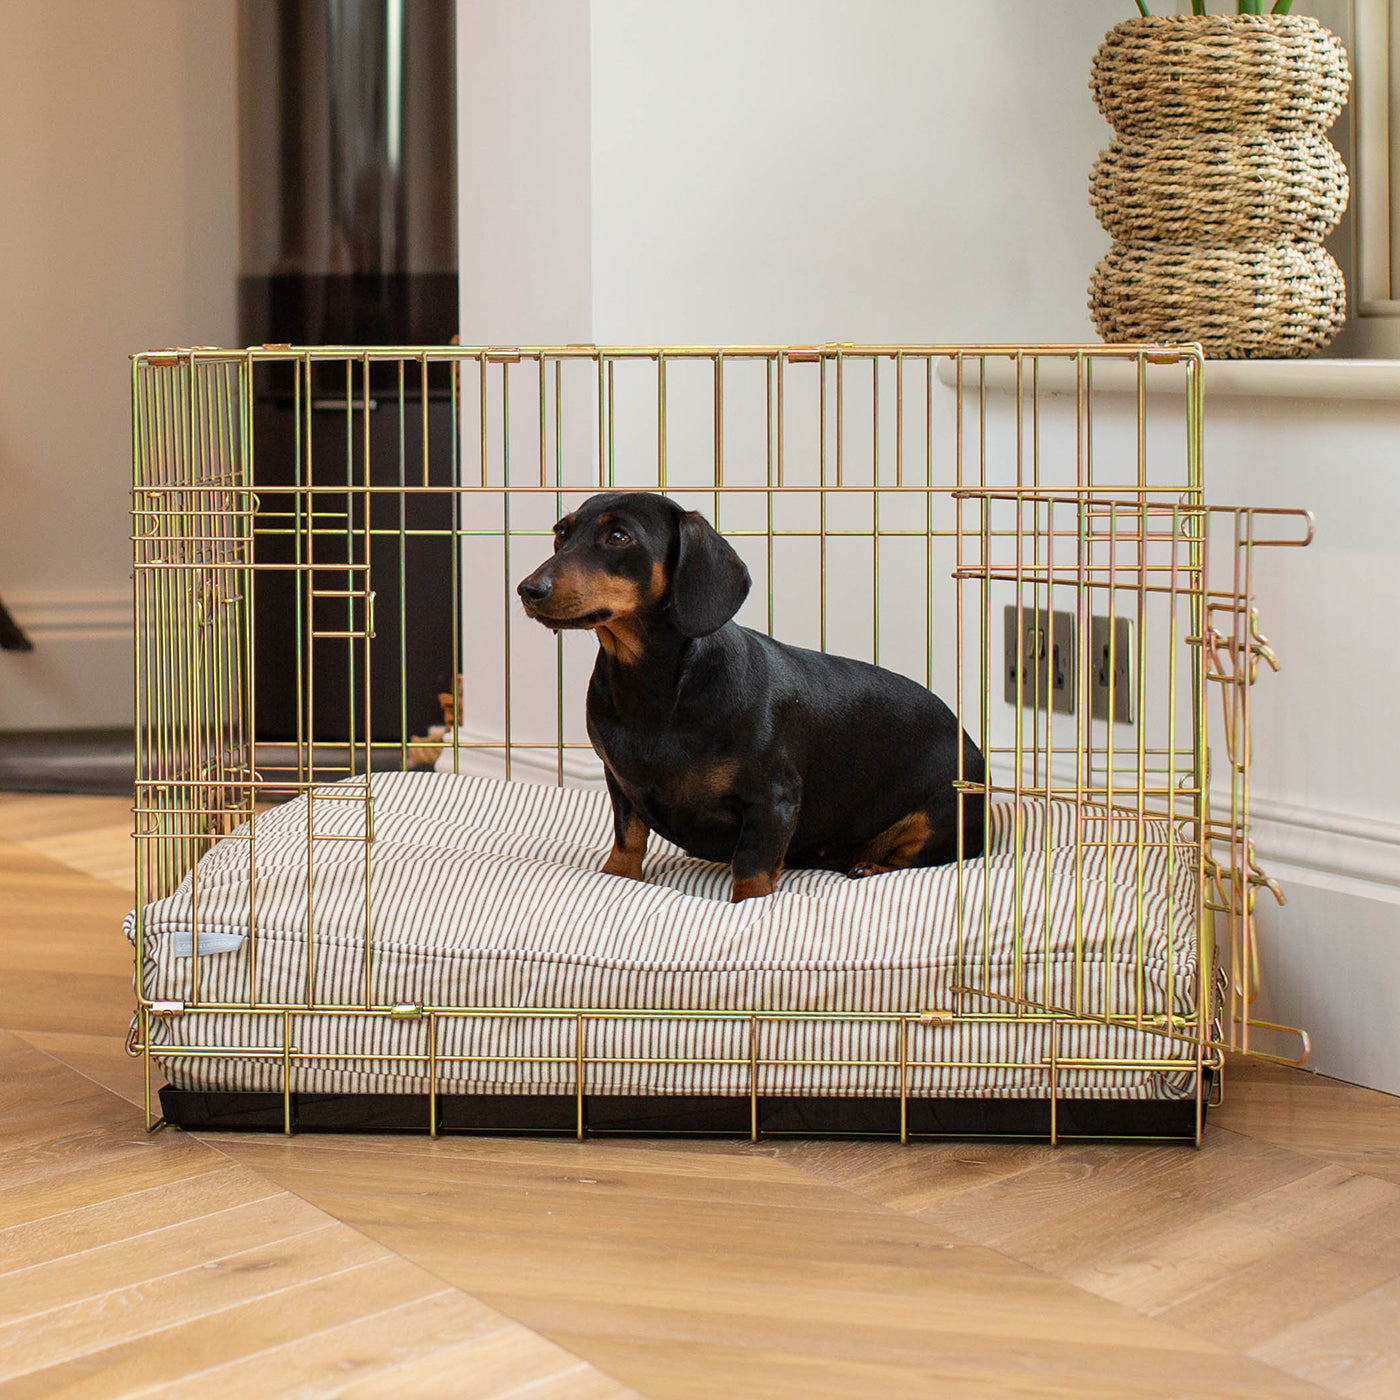 Discover Our Heavy-Duty Dog Crate With Spots & Stripes Regency Stripe Cushion! The Perfect Crate Accessories. Available To Personalise Here at Lords & Labradors